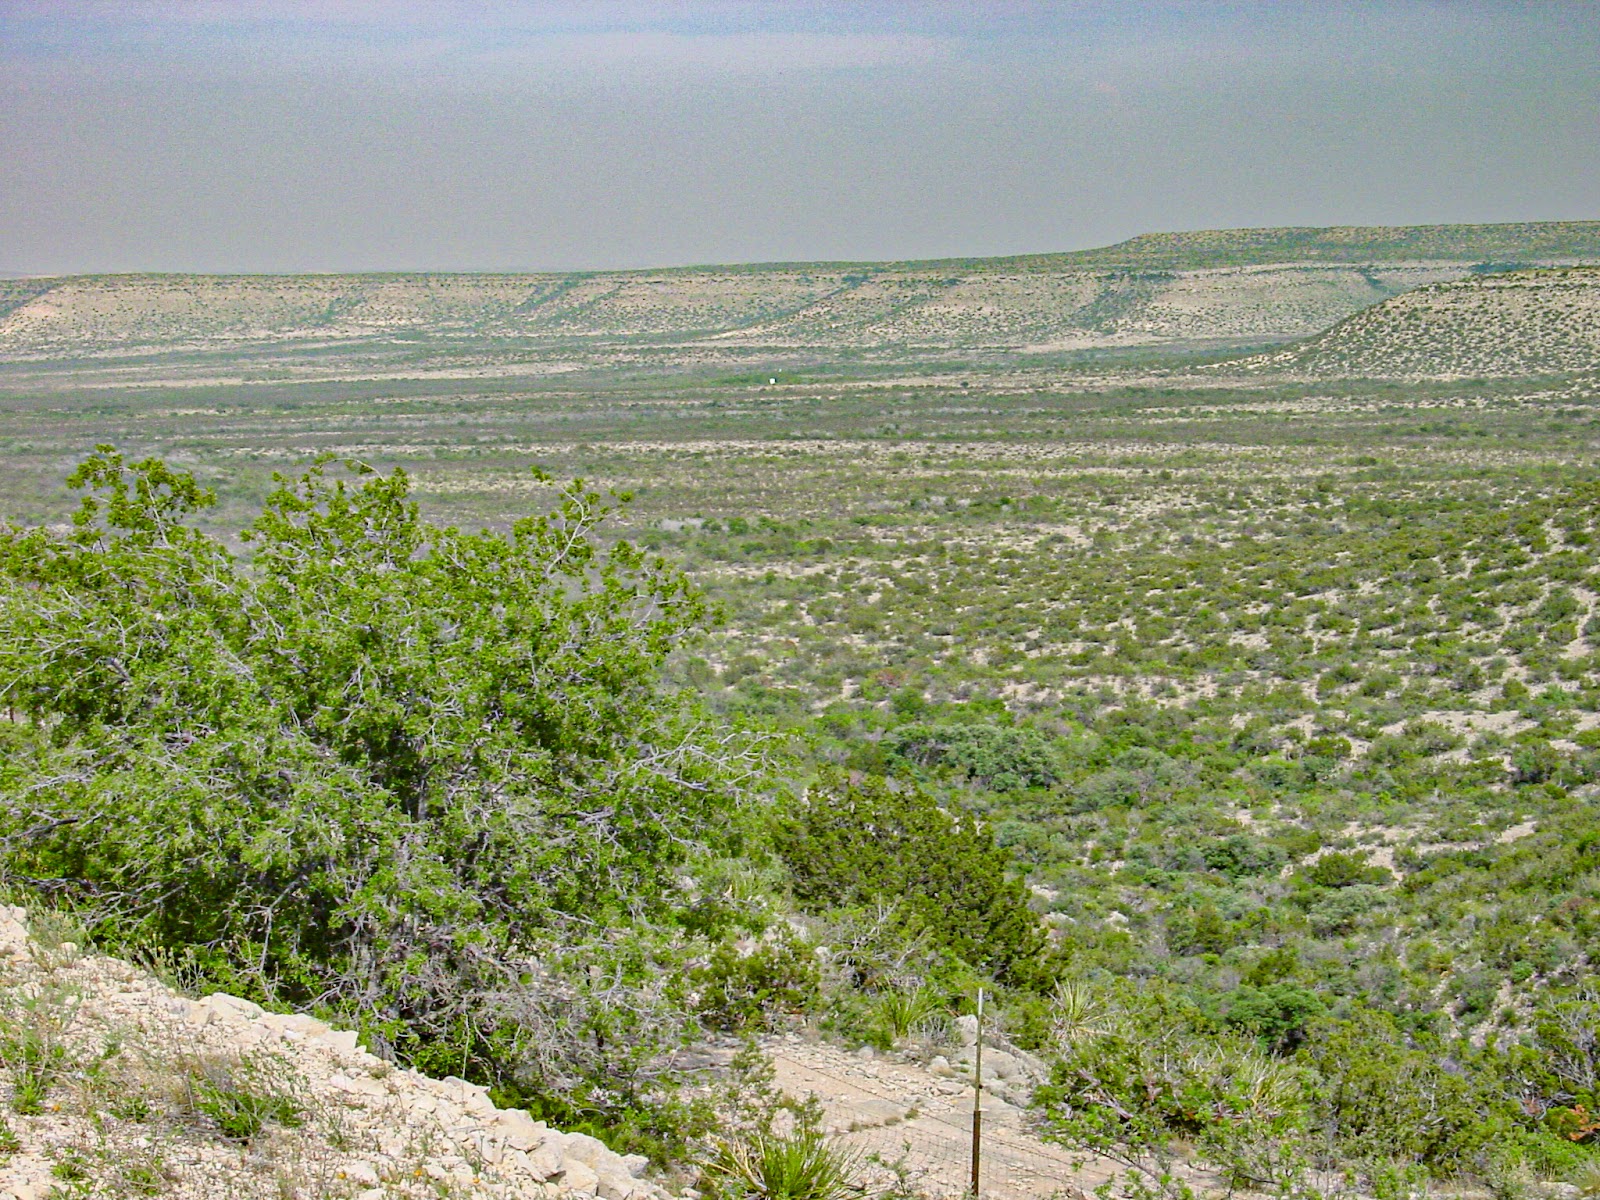 An open desert valley with some green shrubs and distant mesas.